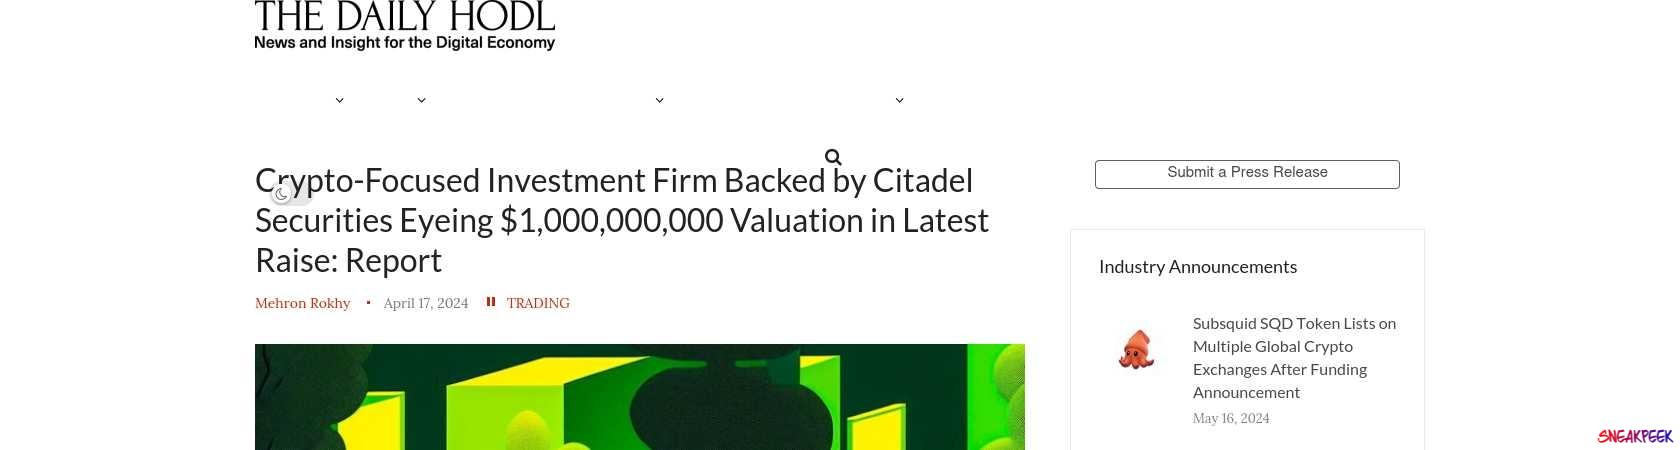 Read the full Article:  ⭲ Crypto-Focused Investment Firm Backed by Citadel Eyeing $1,000,000,000 Valuation in Latest Raise: Report